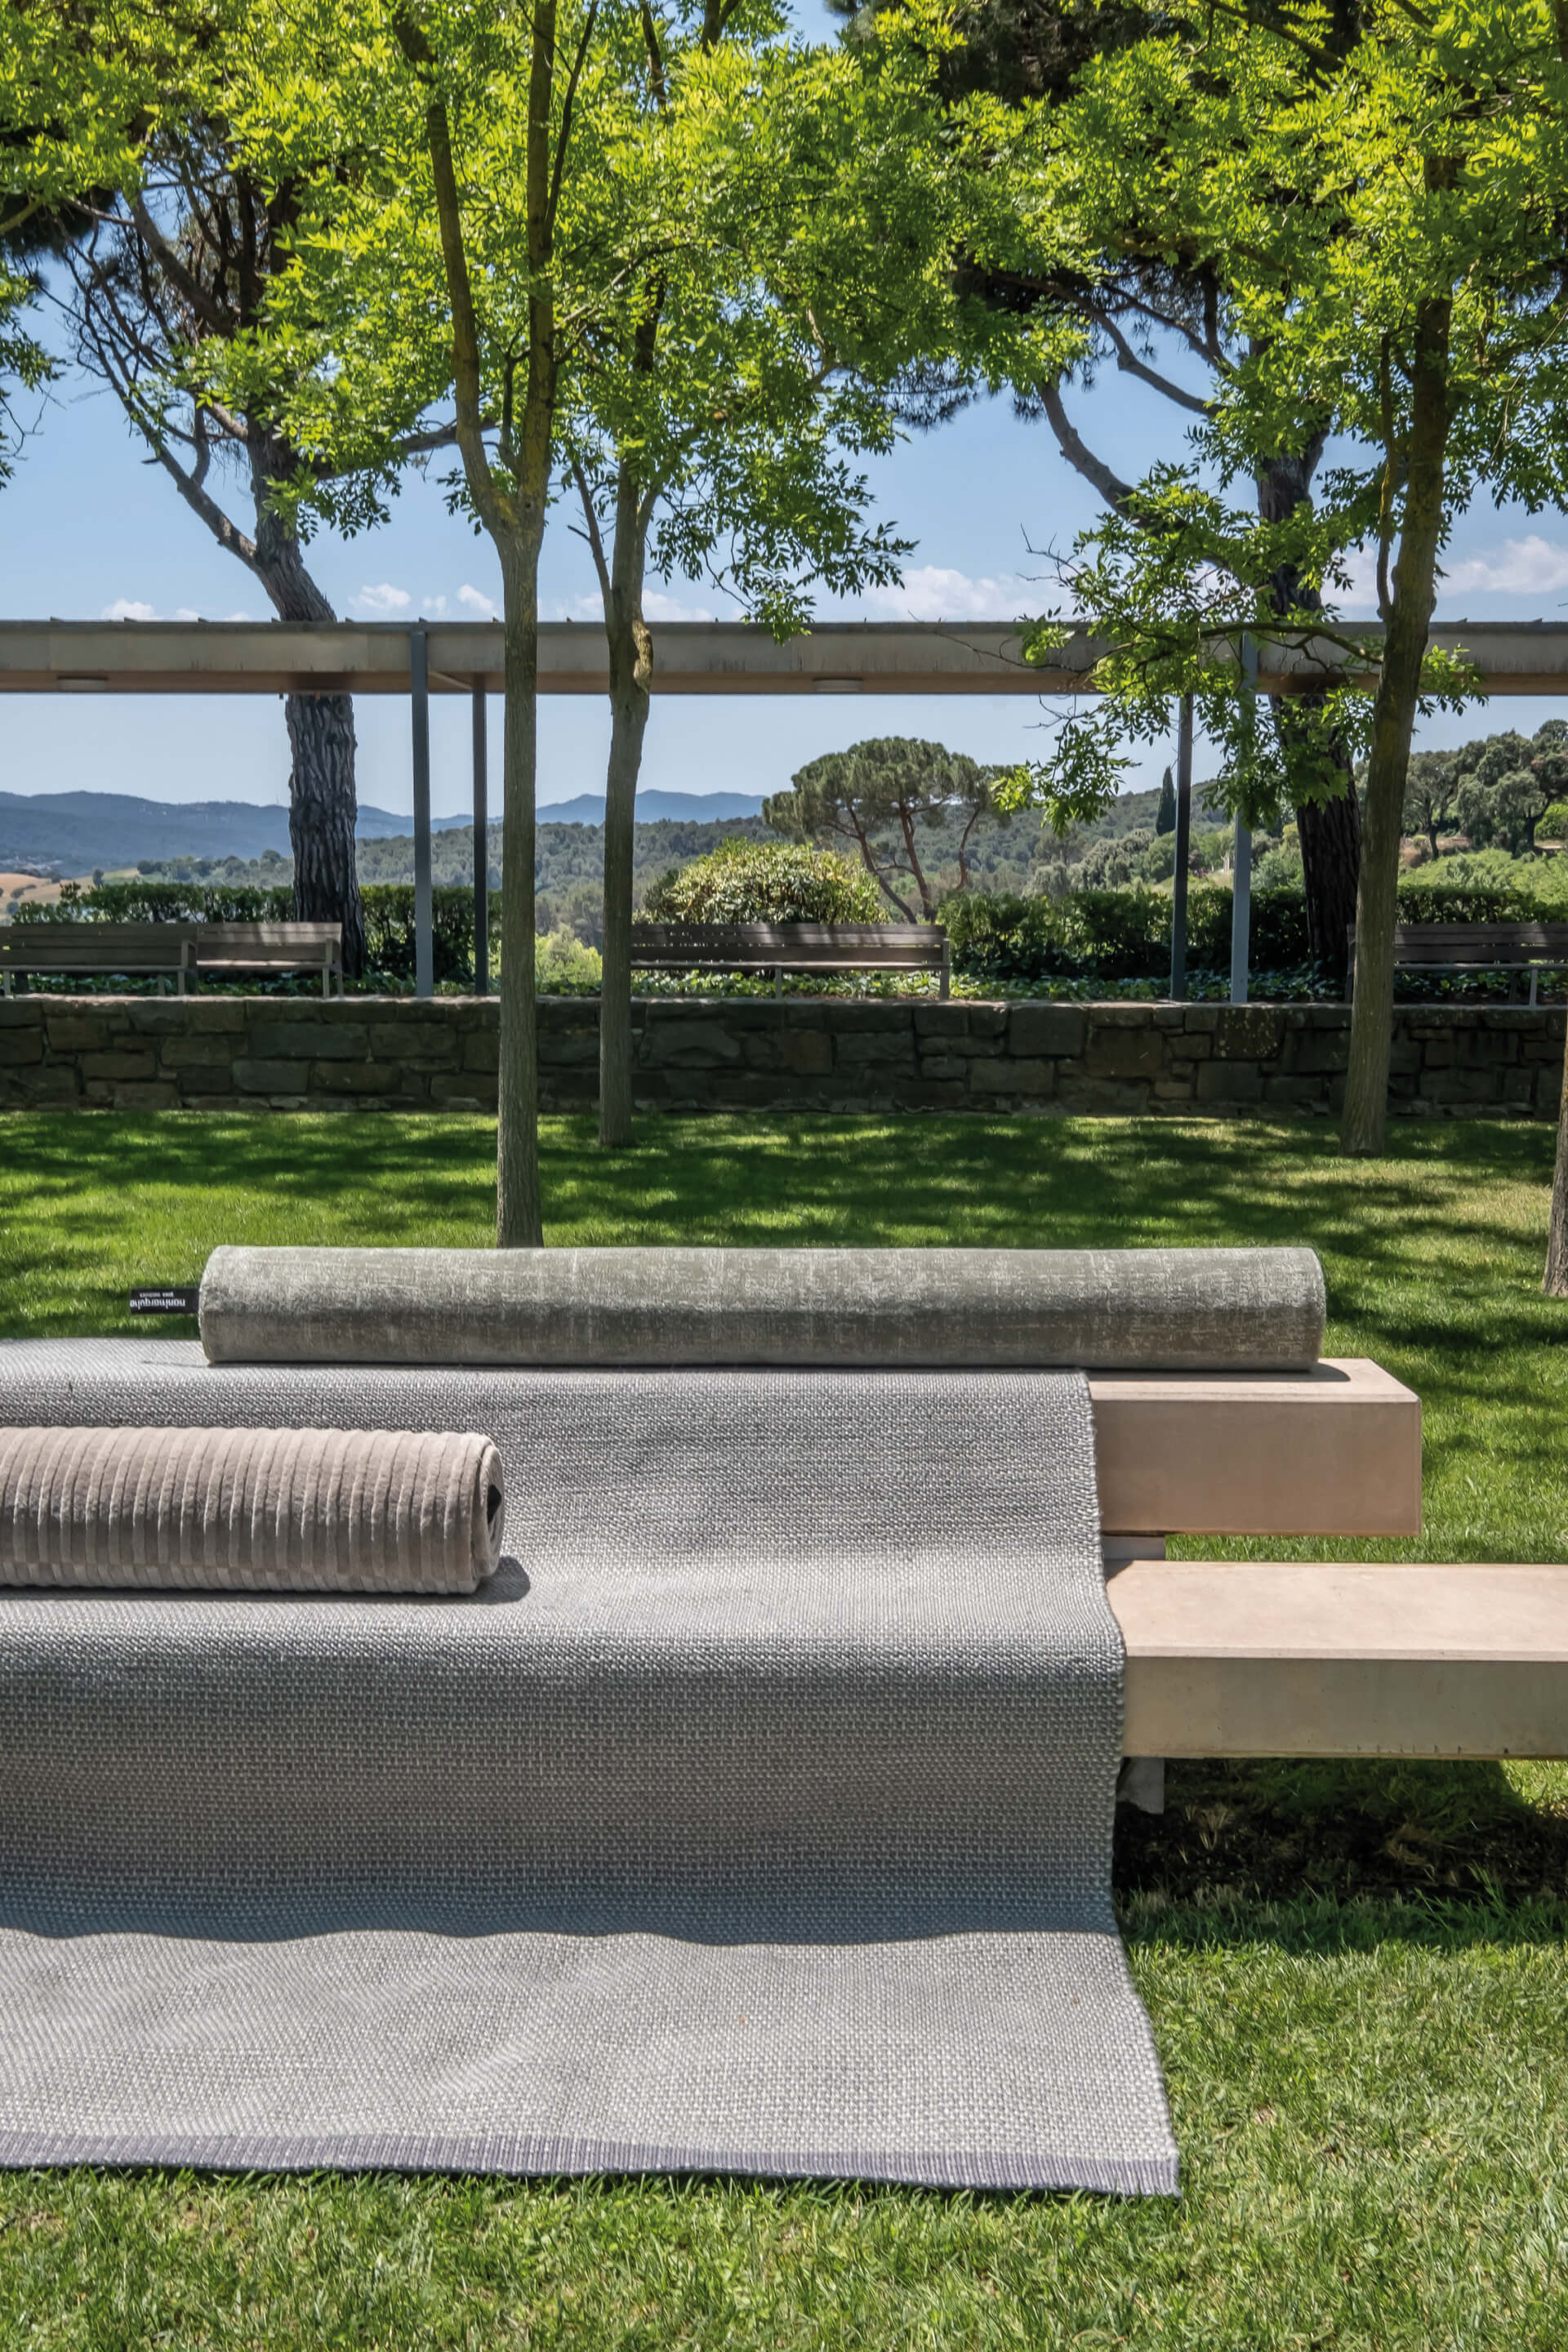 Grey fabric draped over an outdoor bench in a park with mountains in the background